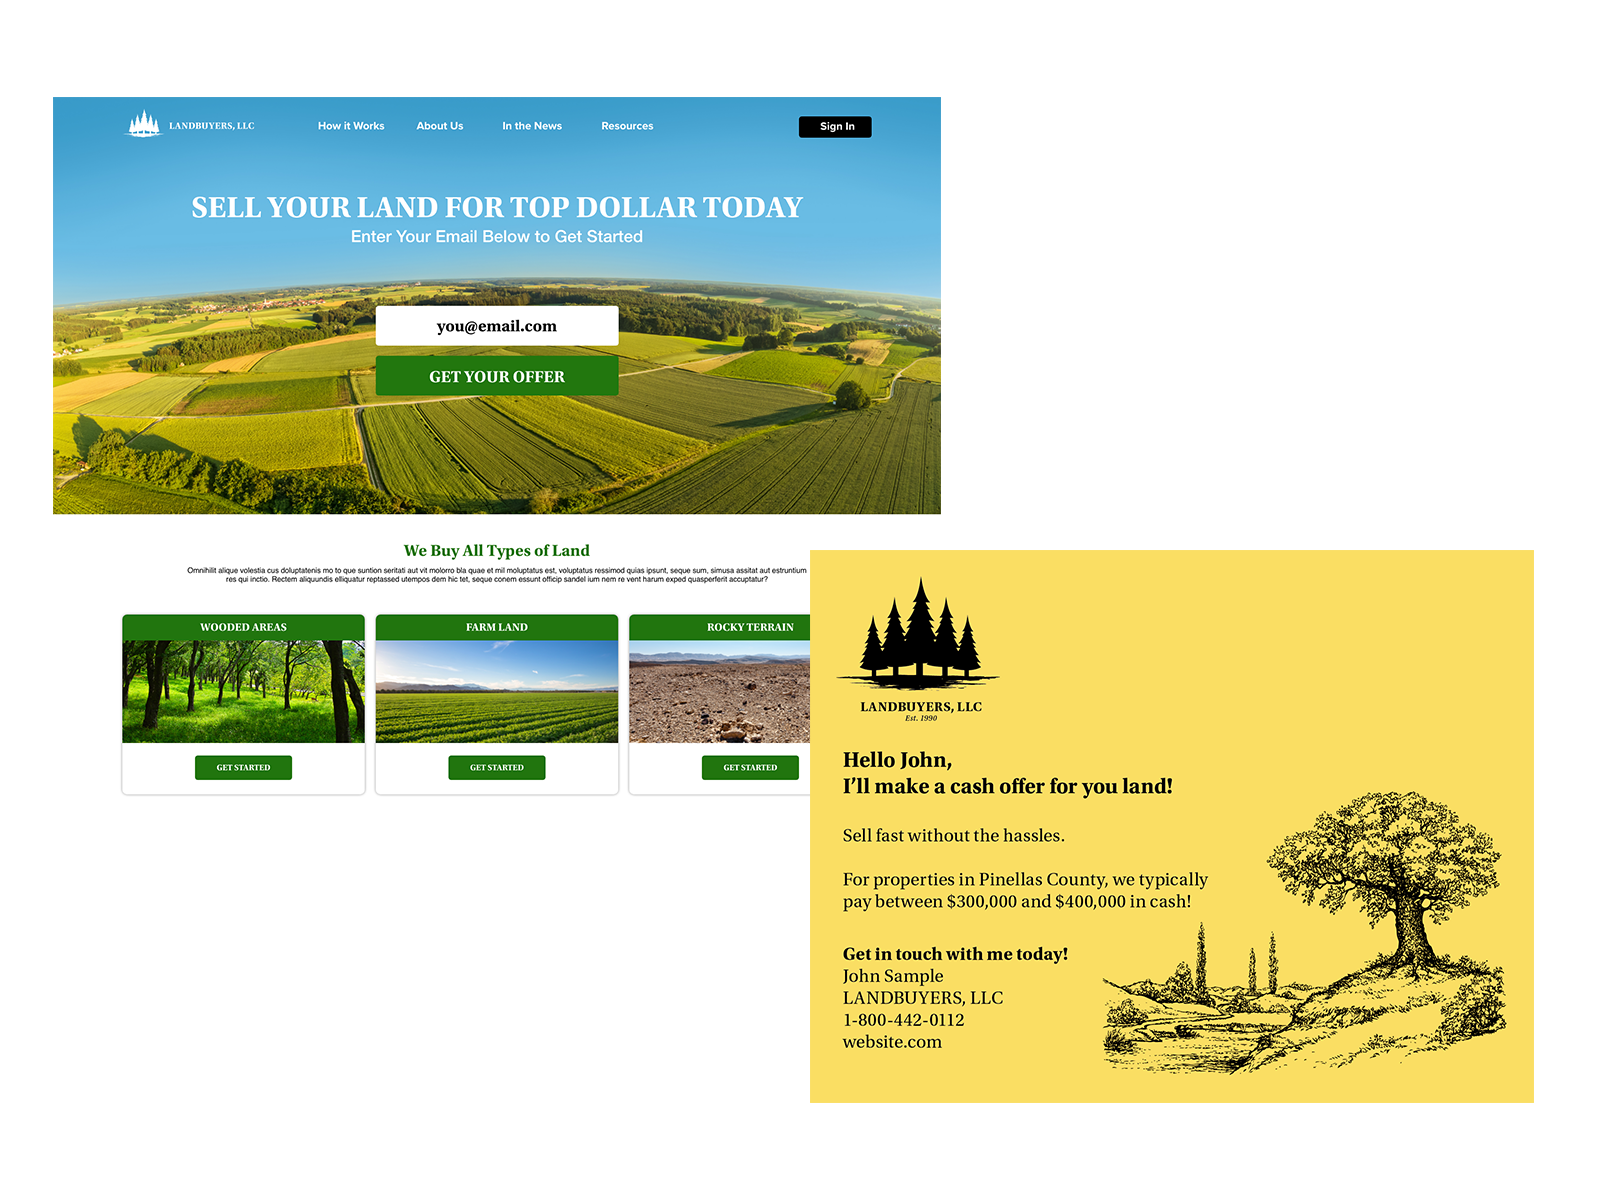 Website to Mailbox for Land Investors